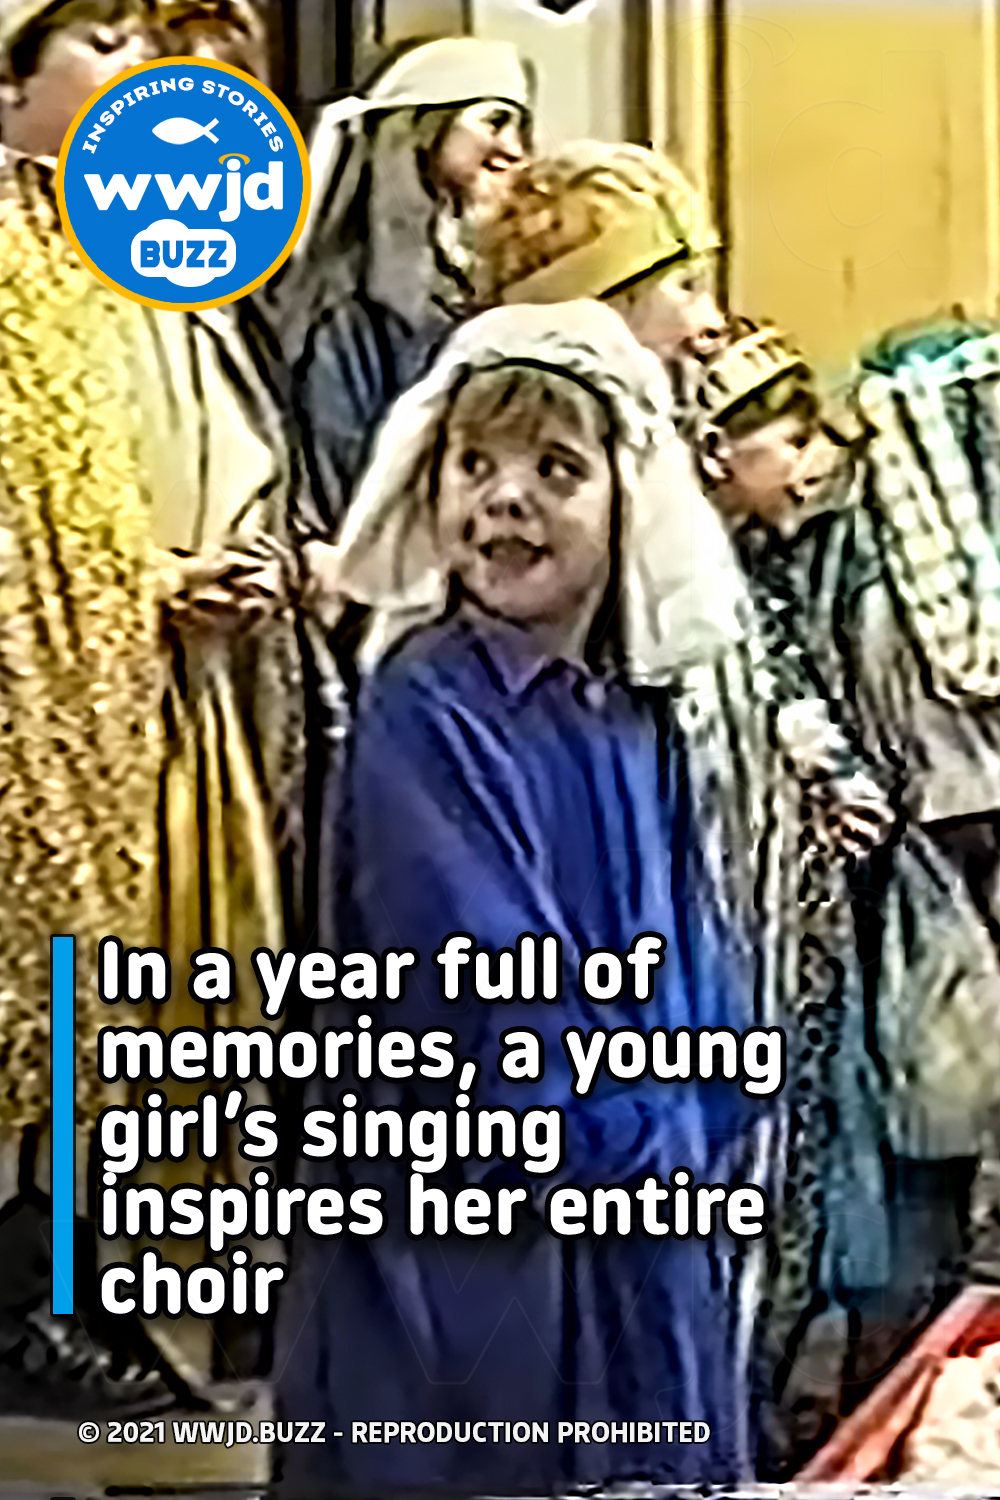 In a year full of memories, a young girl’s singing inspires her entire choir